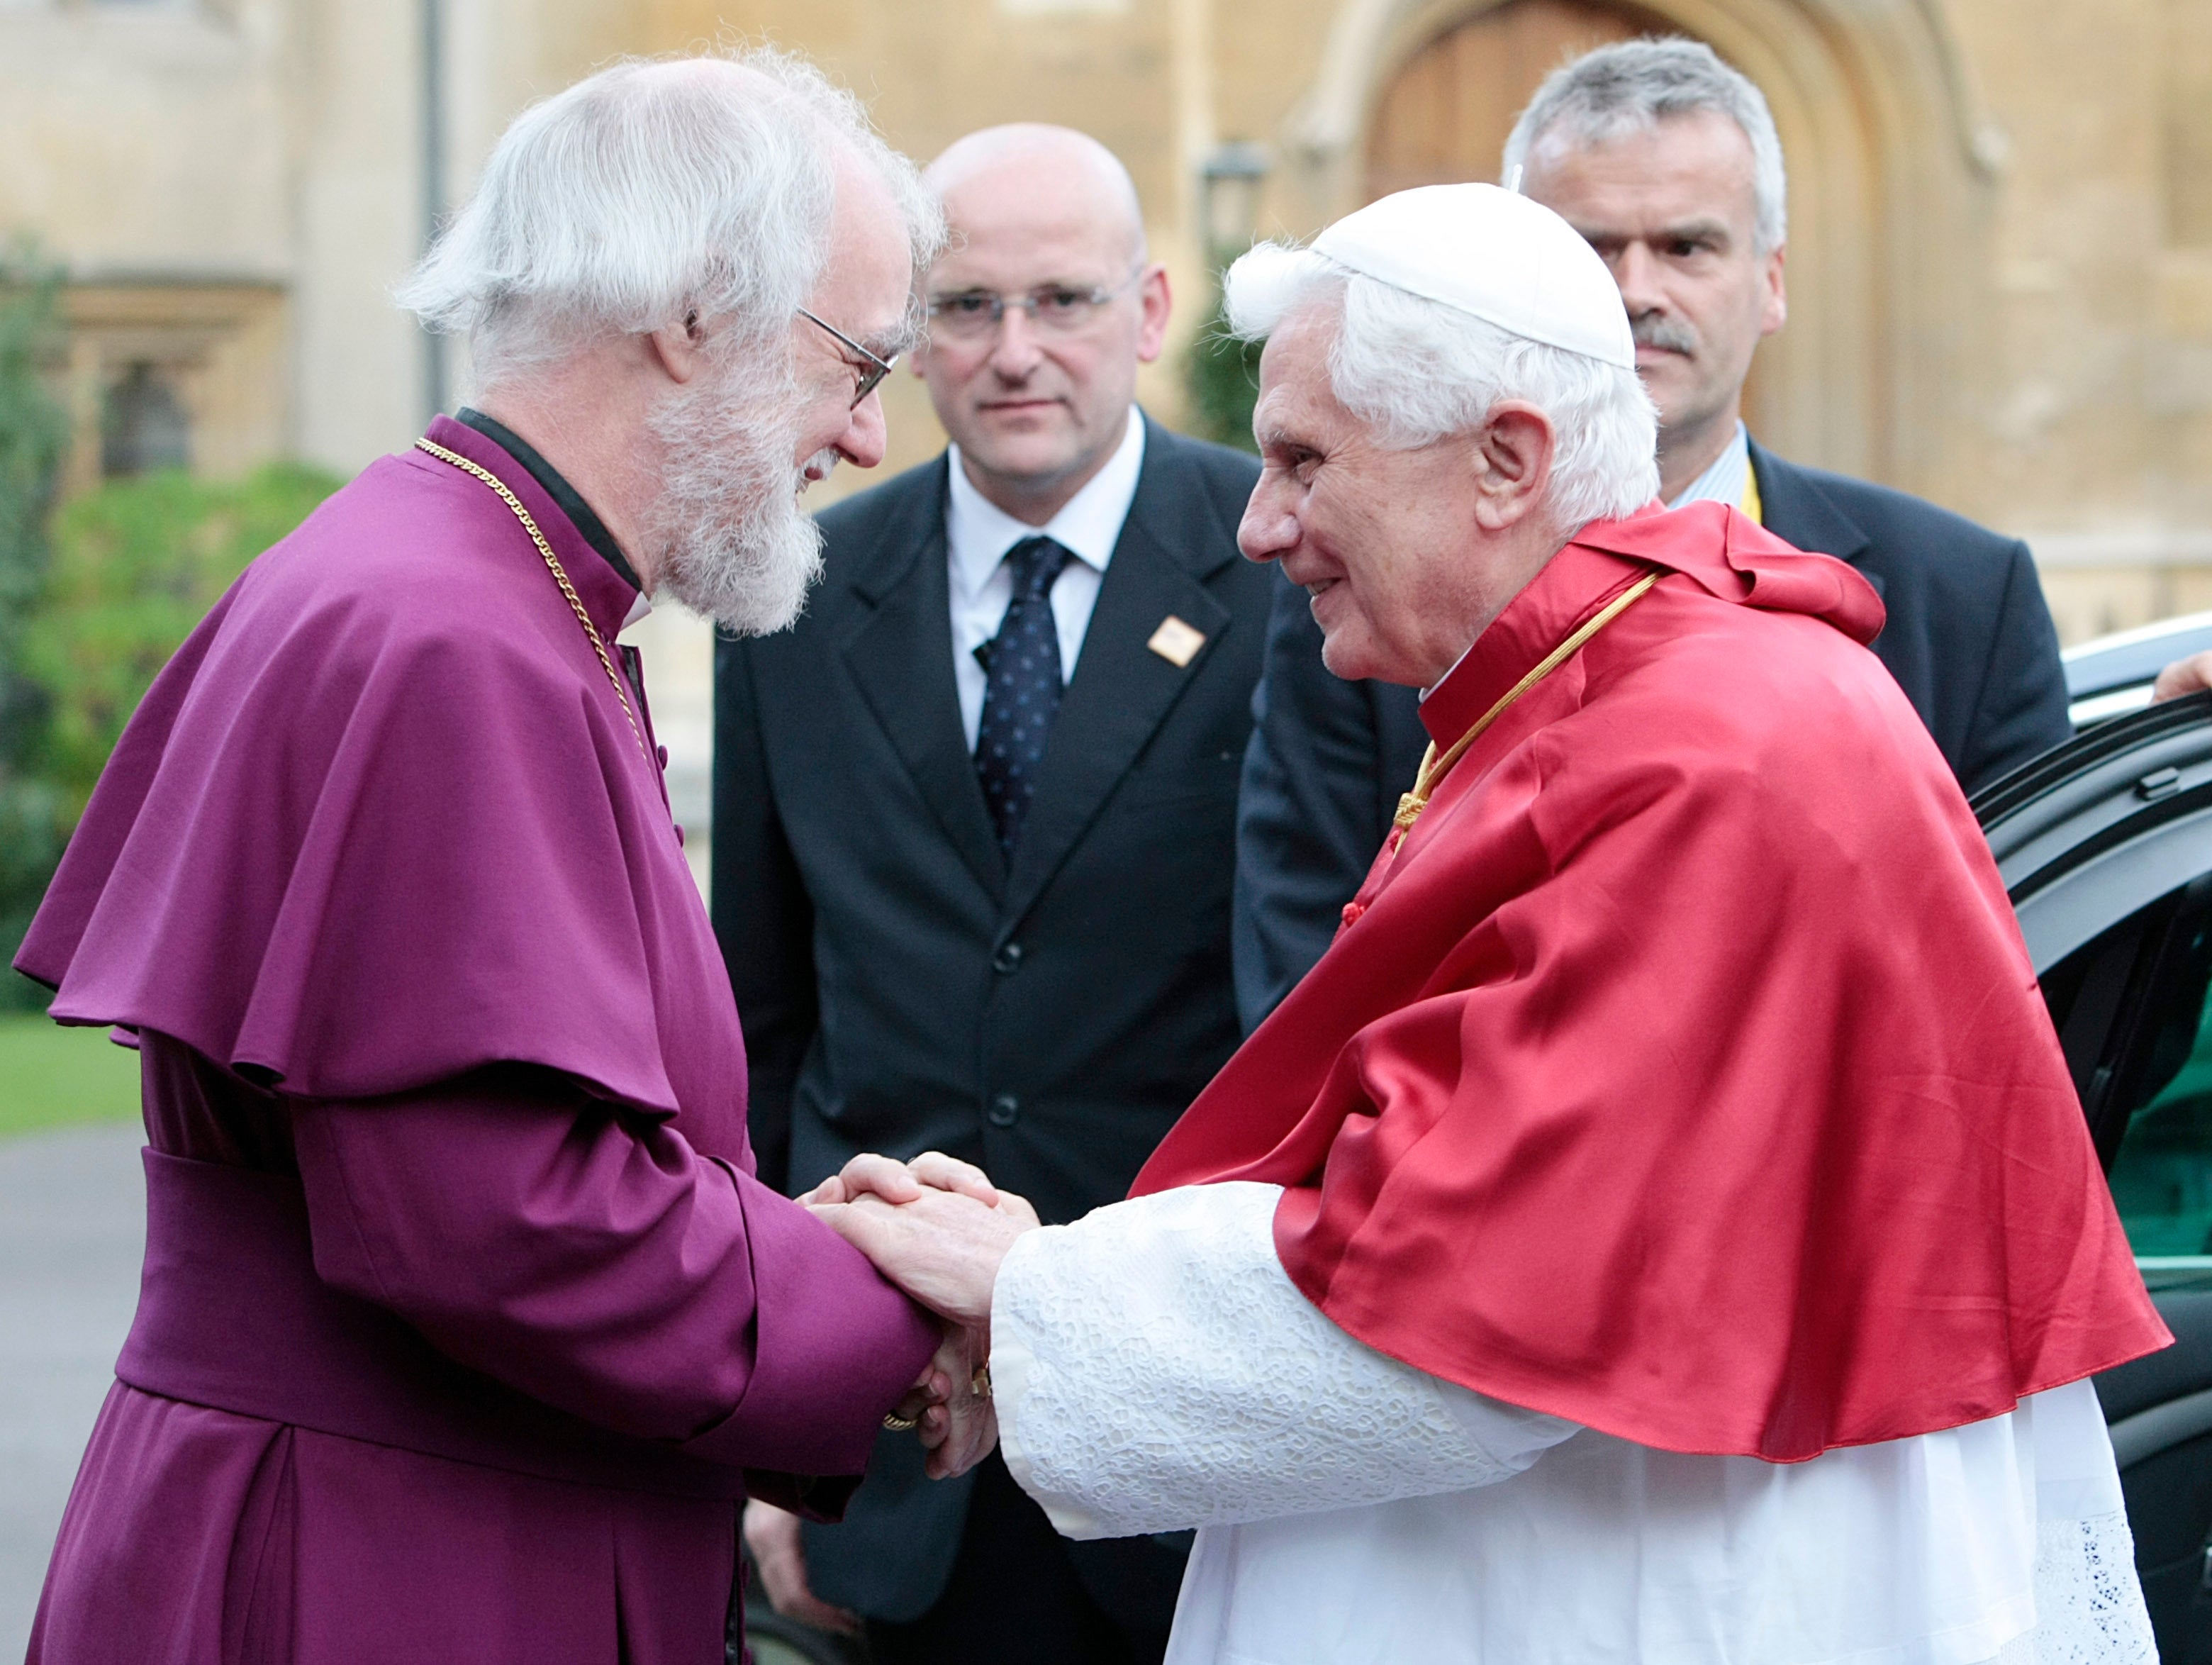 Pope Benedict meets with the Archbishop of Canterbury Rowan Williams, at Lambeth Palace in London in 2010